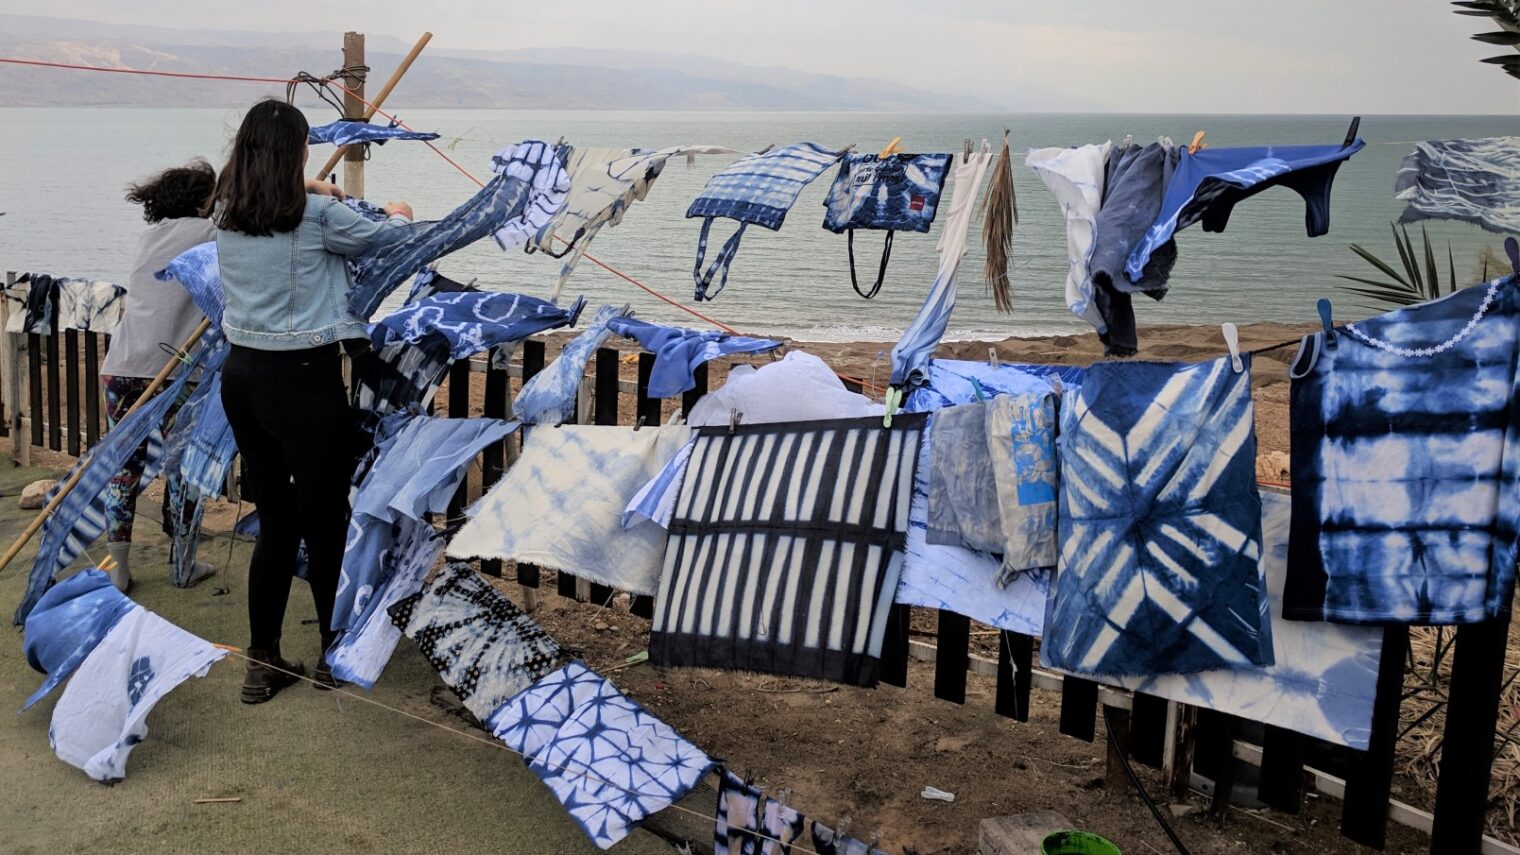 After using a traditional Japanese technique to stain textiles with organic dyes, industrial design students hang their projects to dry at Bezalel Academy’s annual Dead Sea Seminar. Photo: courtesy